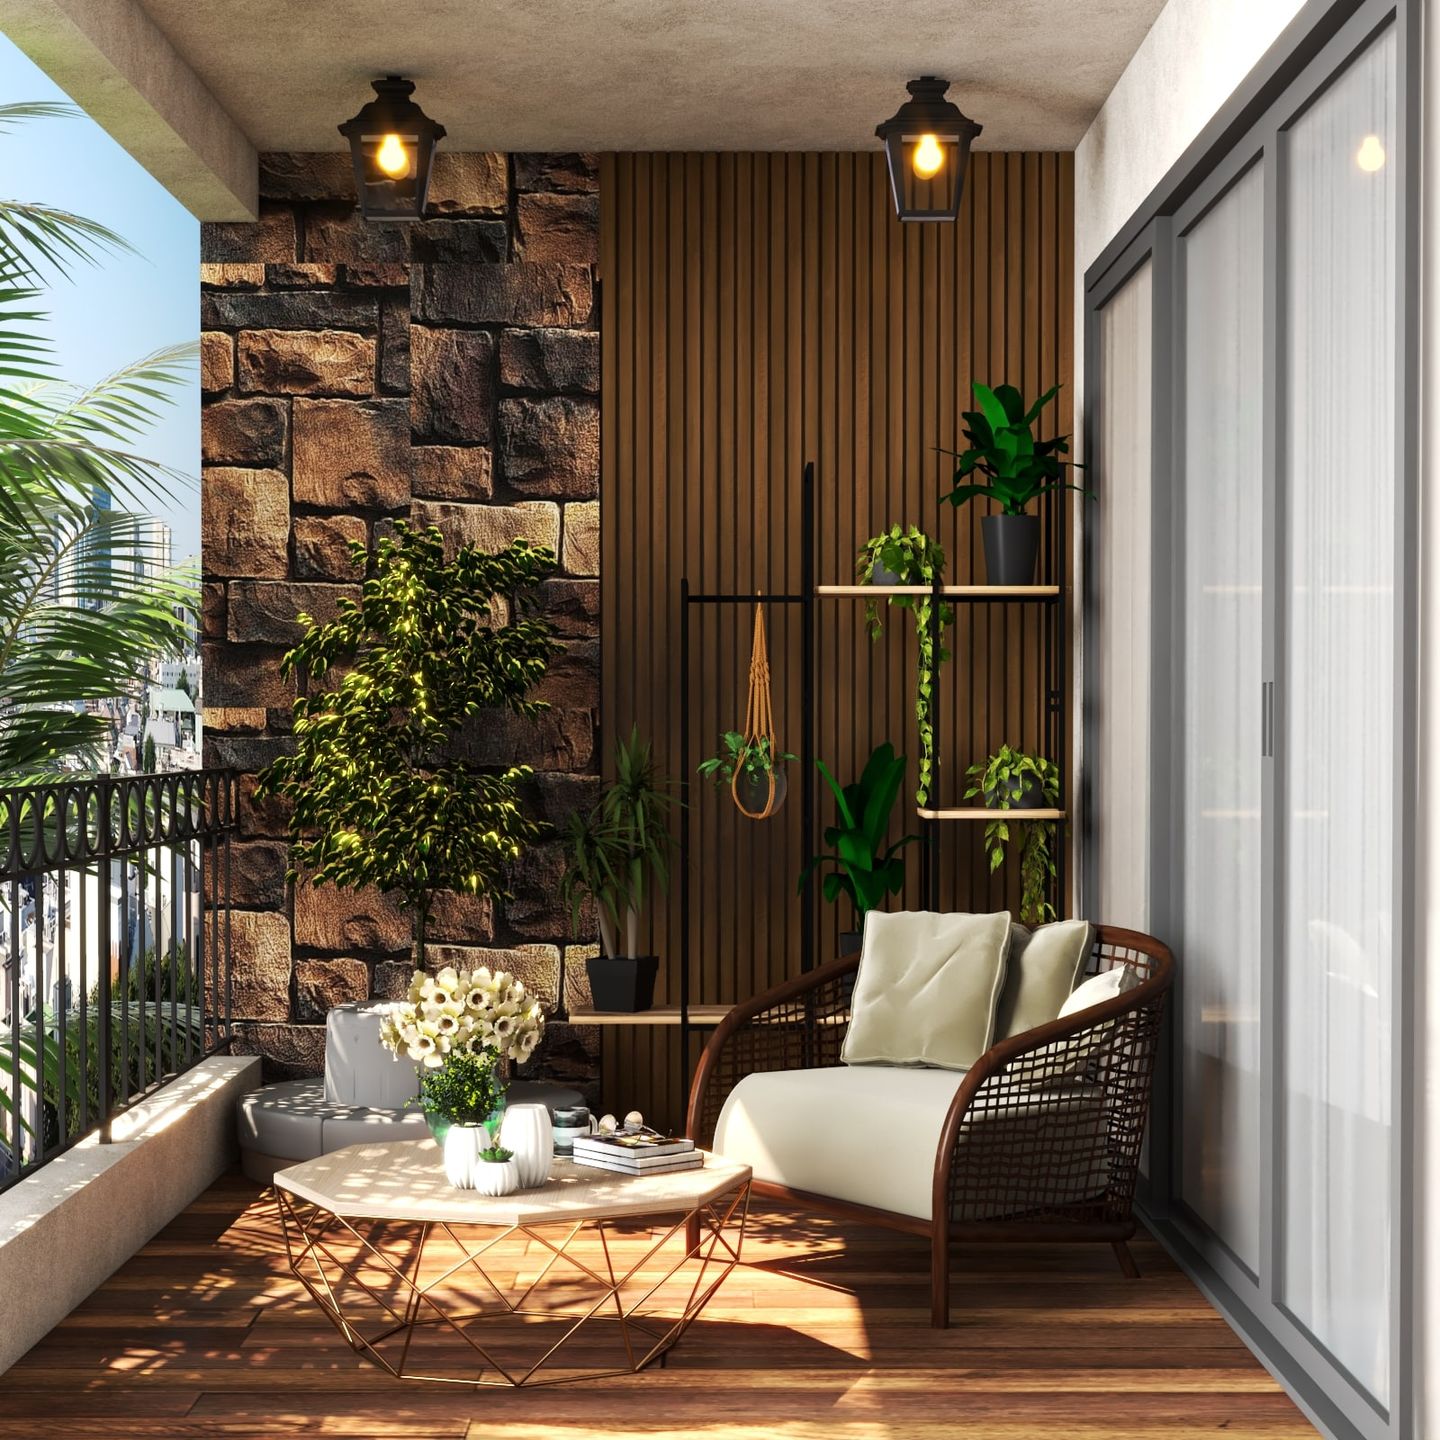 6X9 Ft Tropical Balcony Design With Outdoor White Chair - Livspace